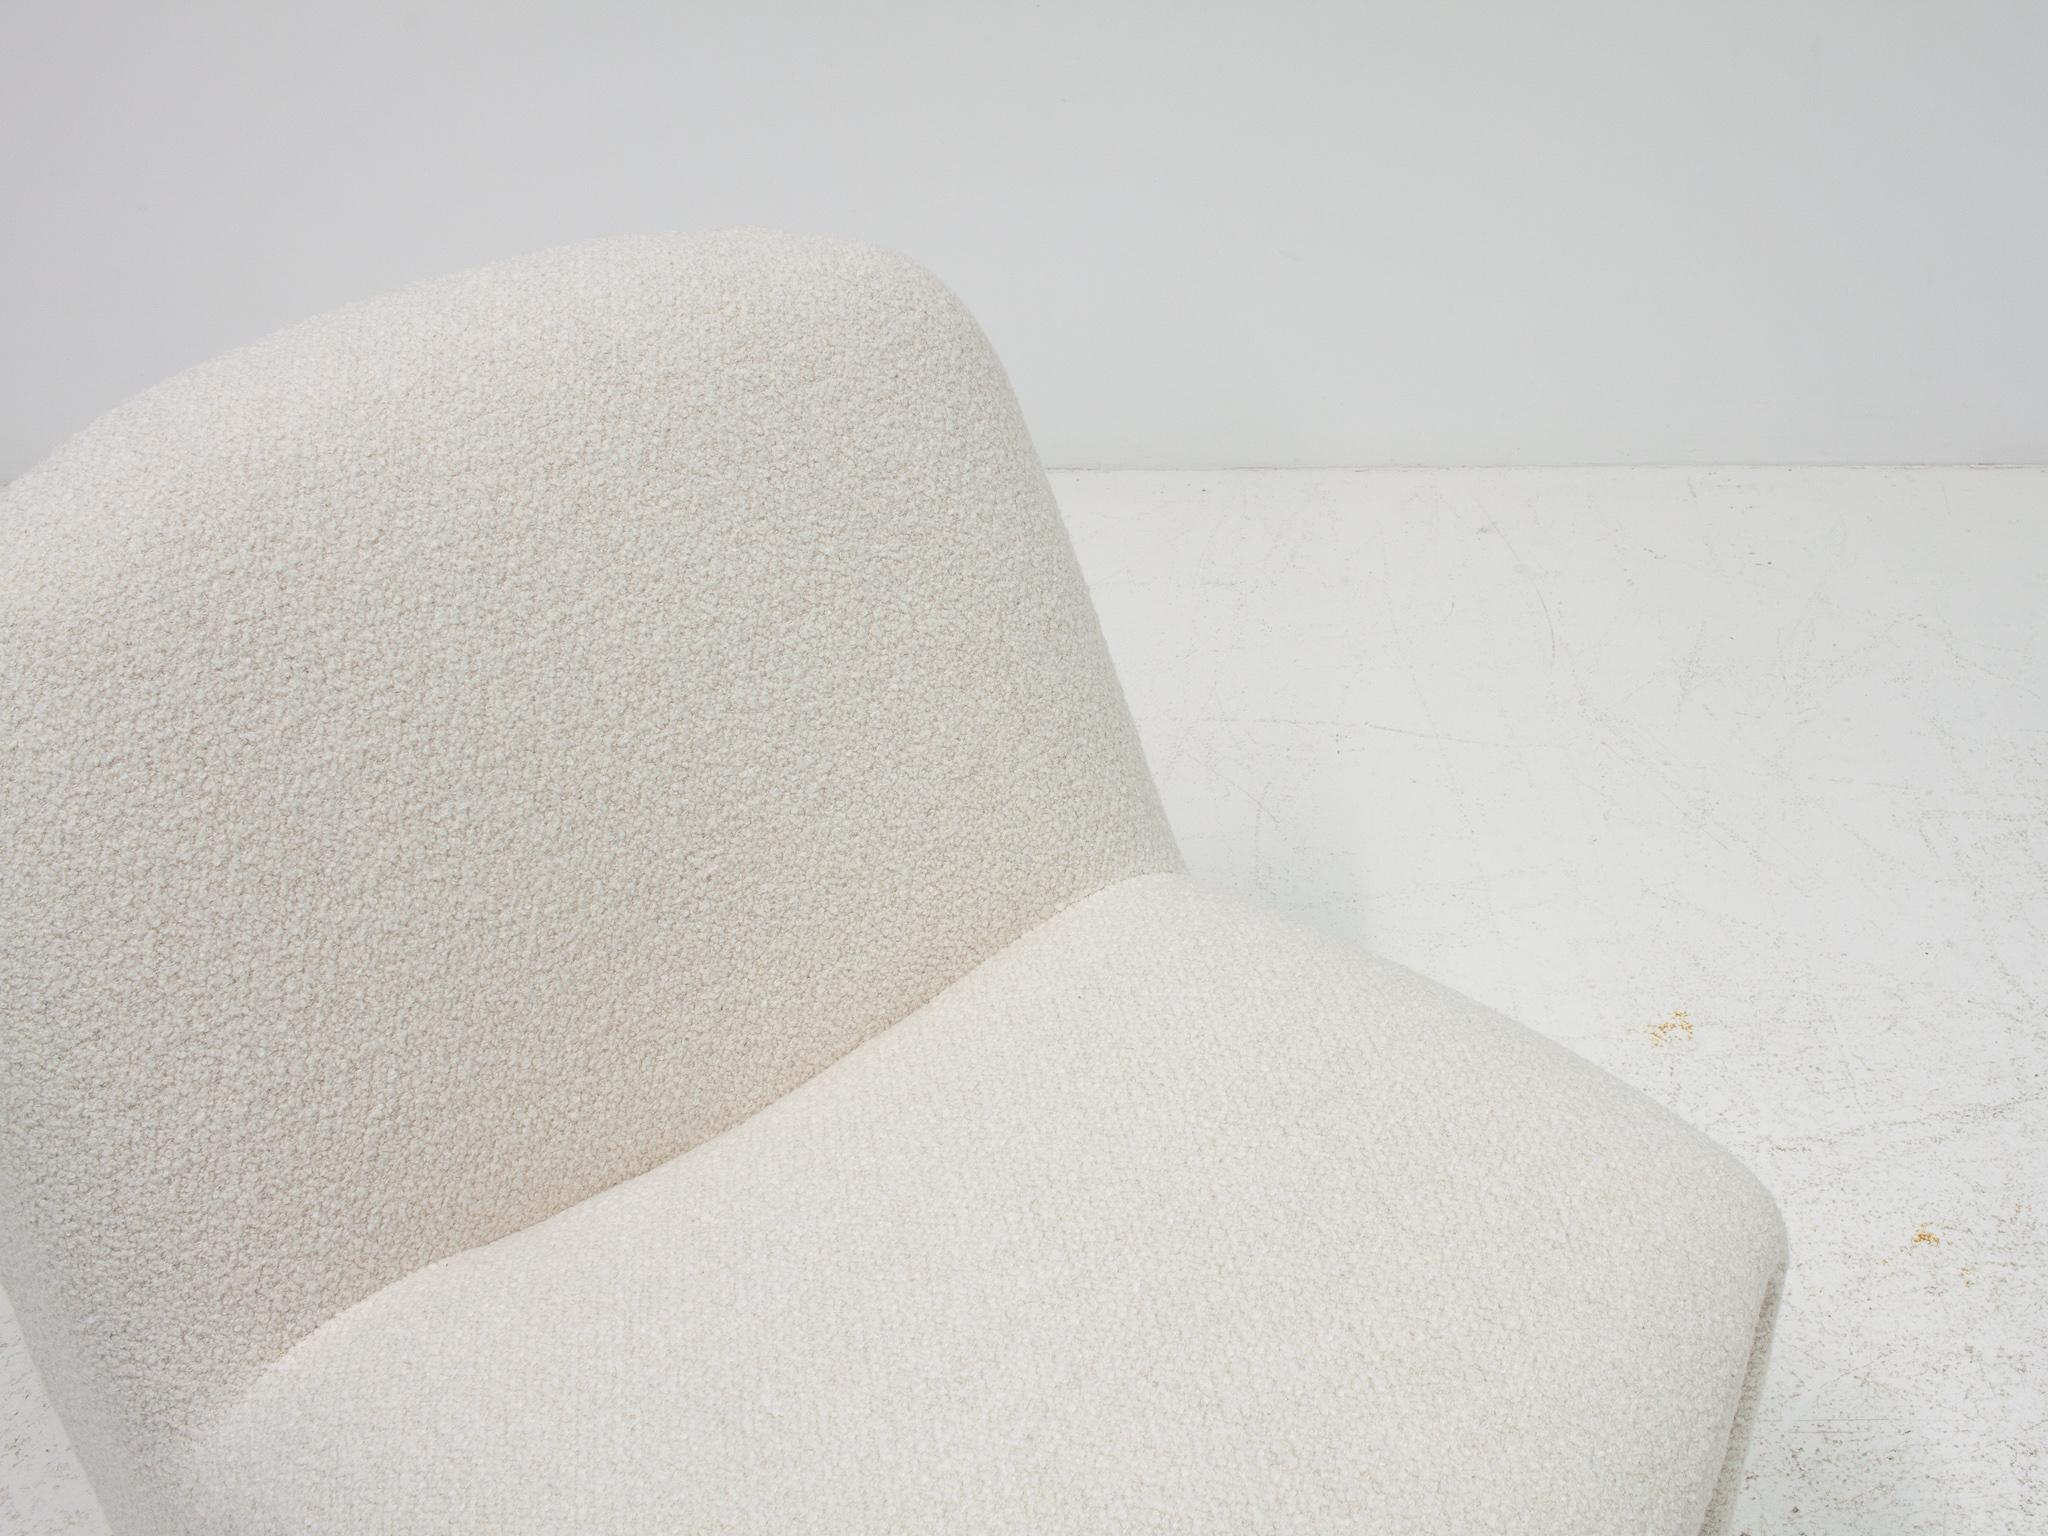 Giancarlo Piretti “Alky” Chairs In Yarn Collective bouclé *Customizable* For Sale 2